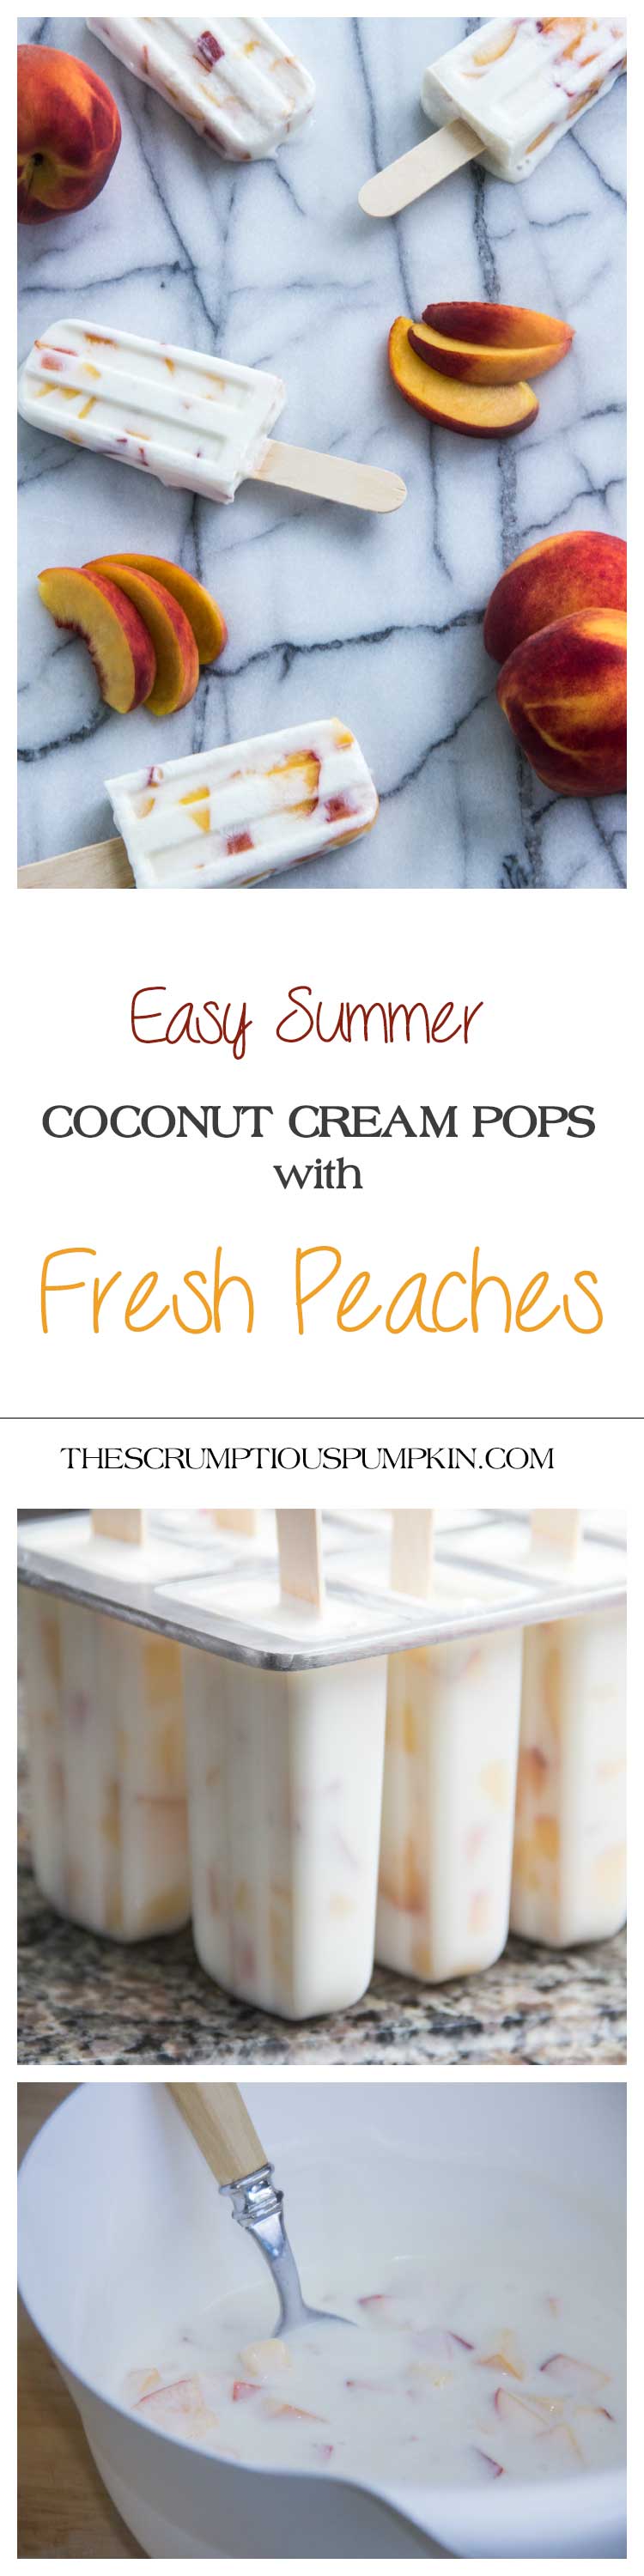 Easy-Summer-Coconut-Cream-Pops-with-Fresh-Peaches